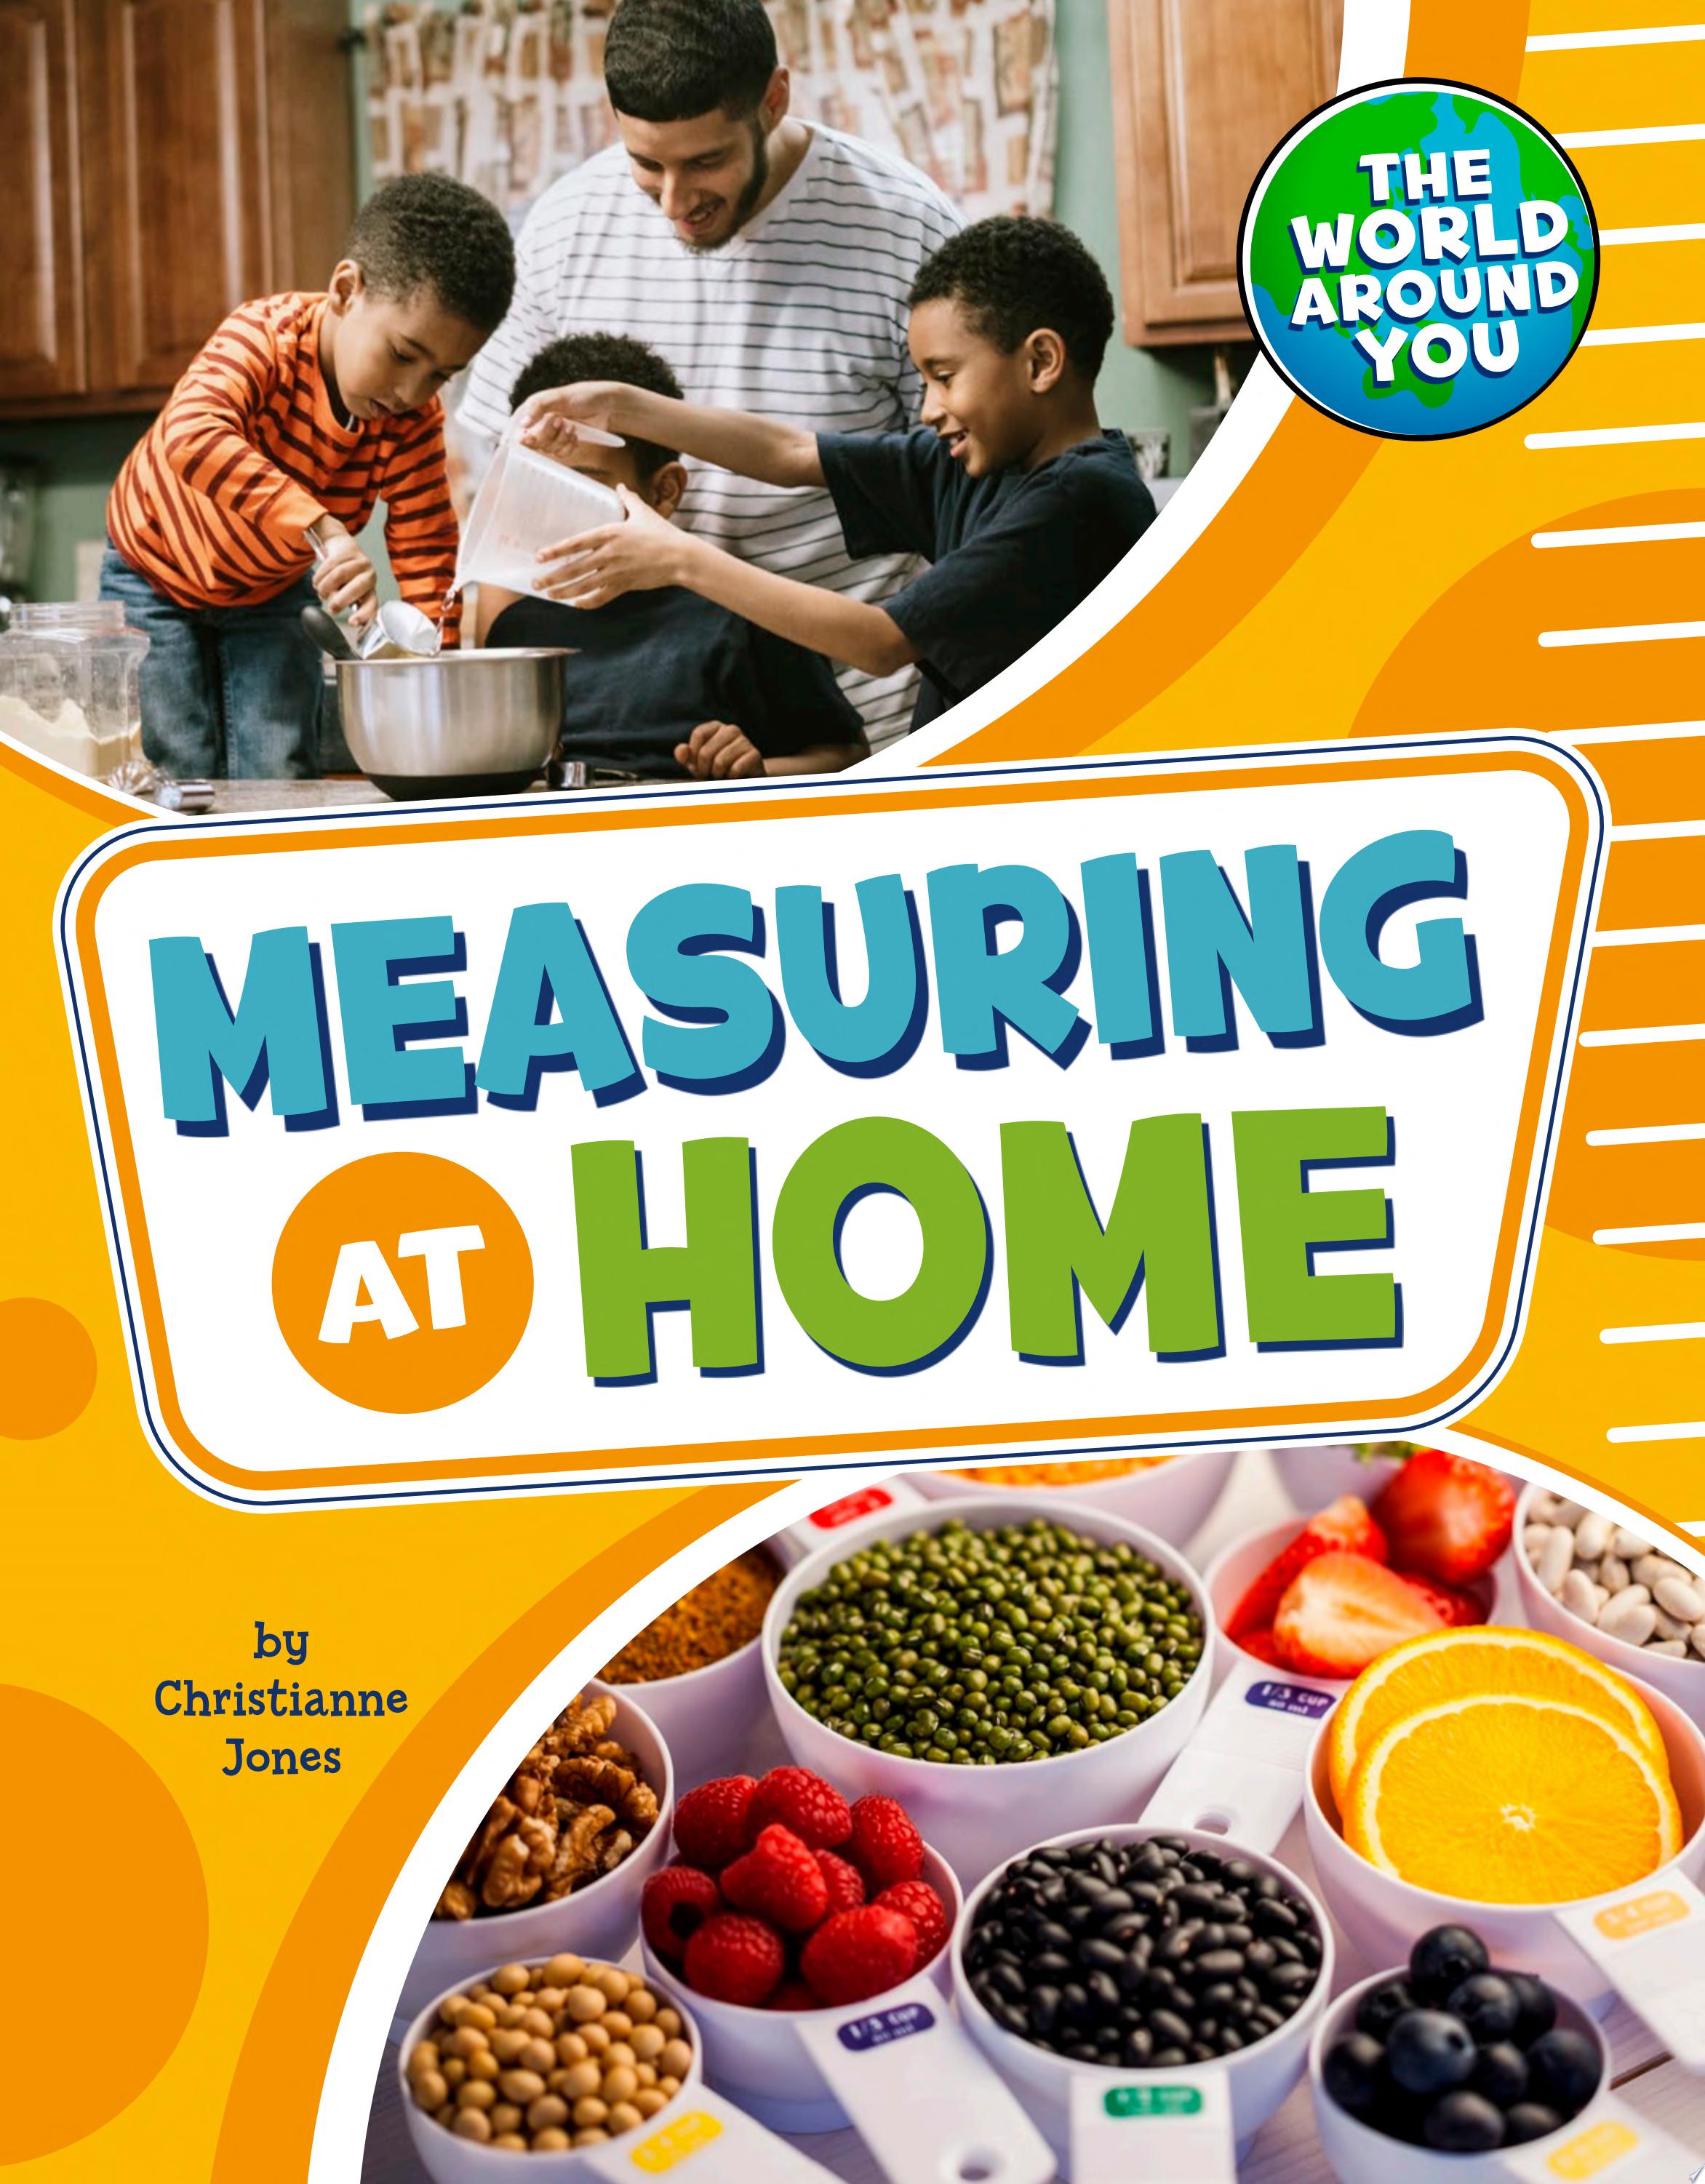 Image for "Measuring at Home"